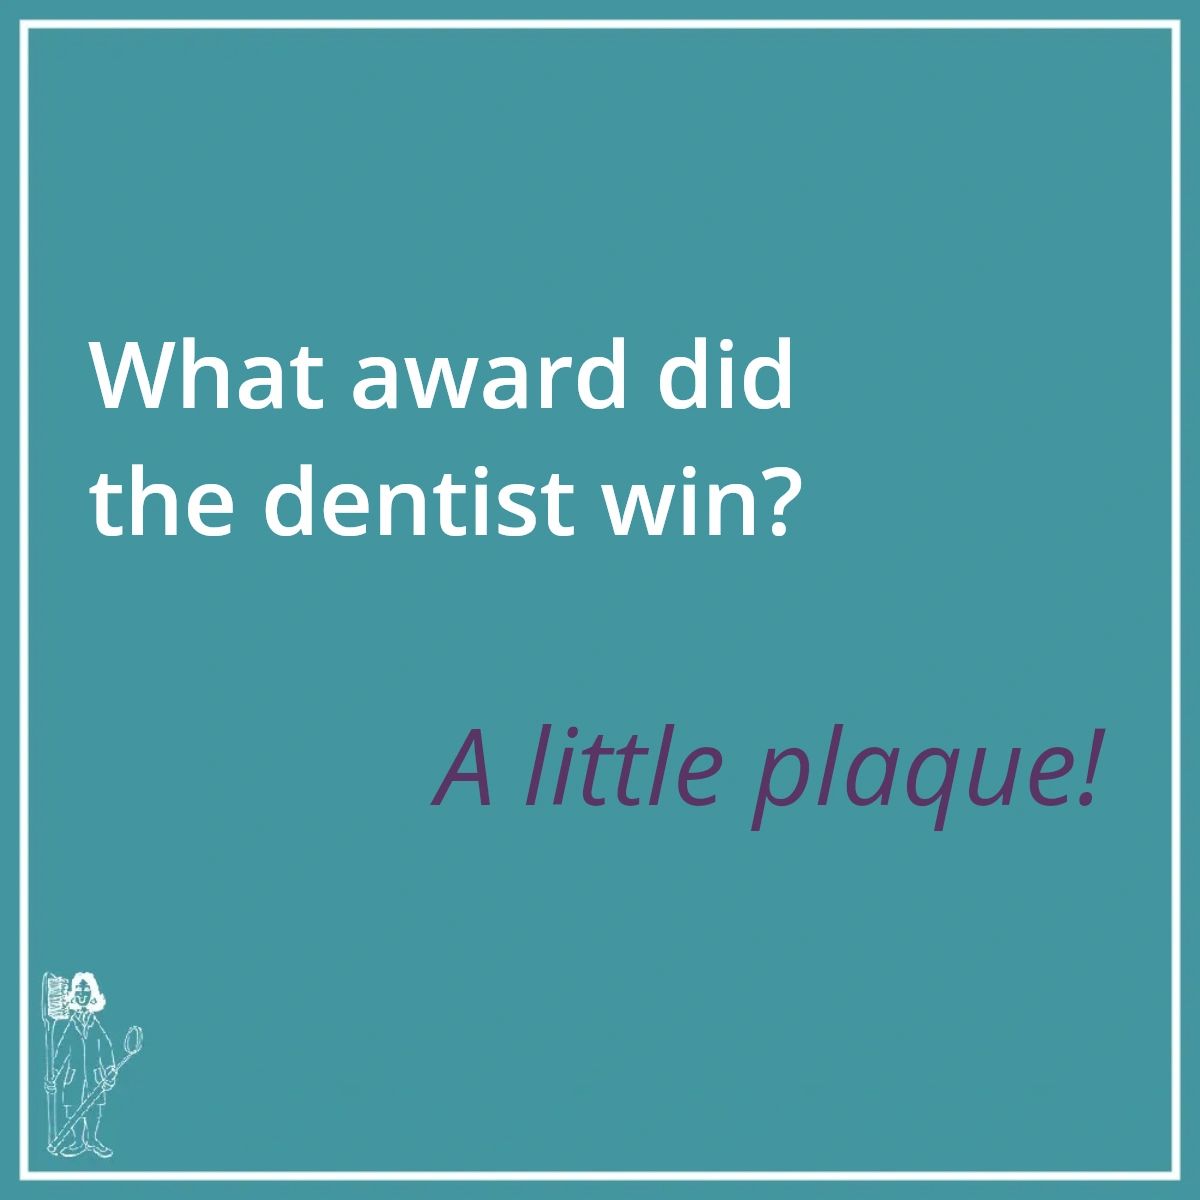 Just a little joke from your friendly neighborhood dentist and a reminder to come in for a routine cleaning. 😄 #dentist #DentalPlaque #CleanTeeth